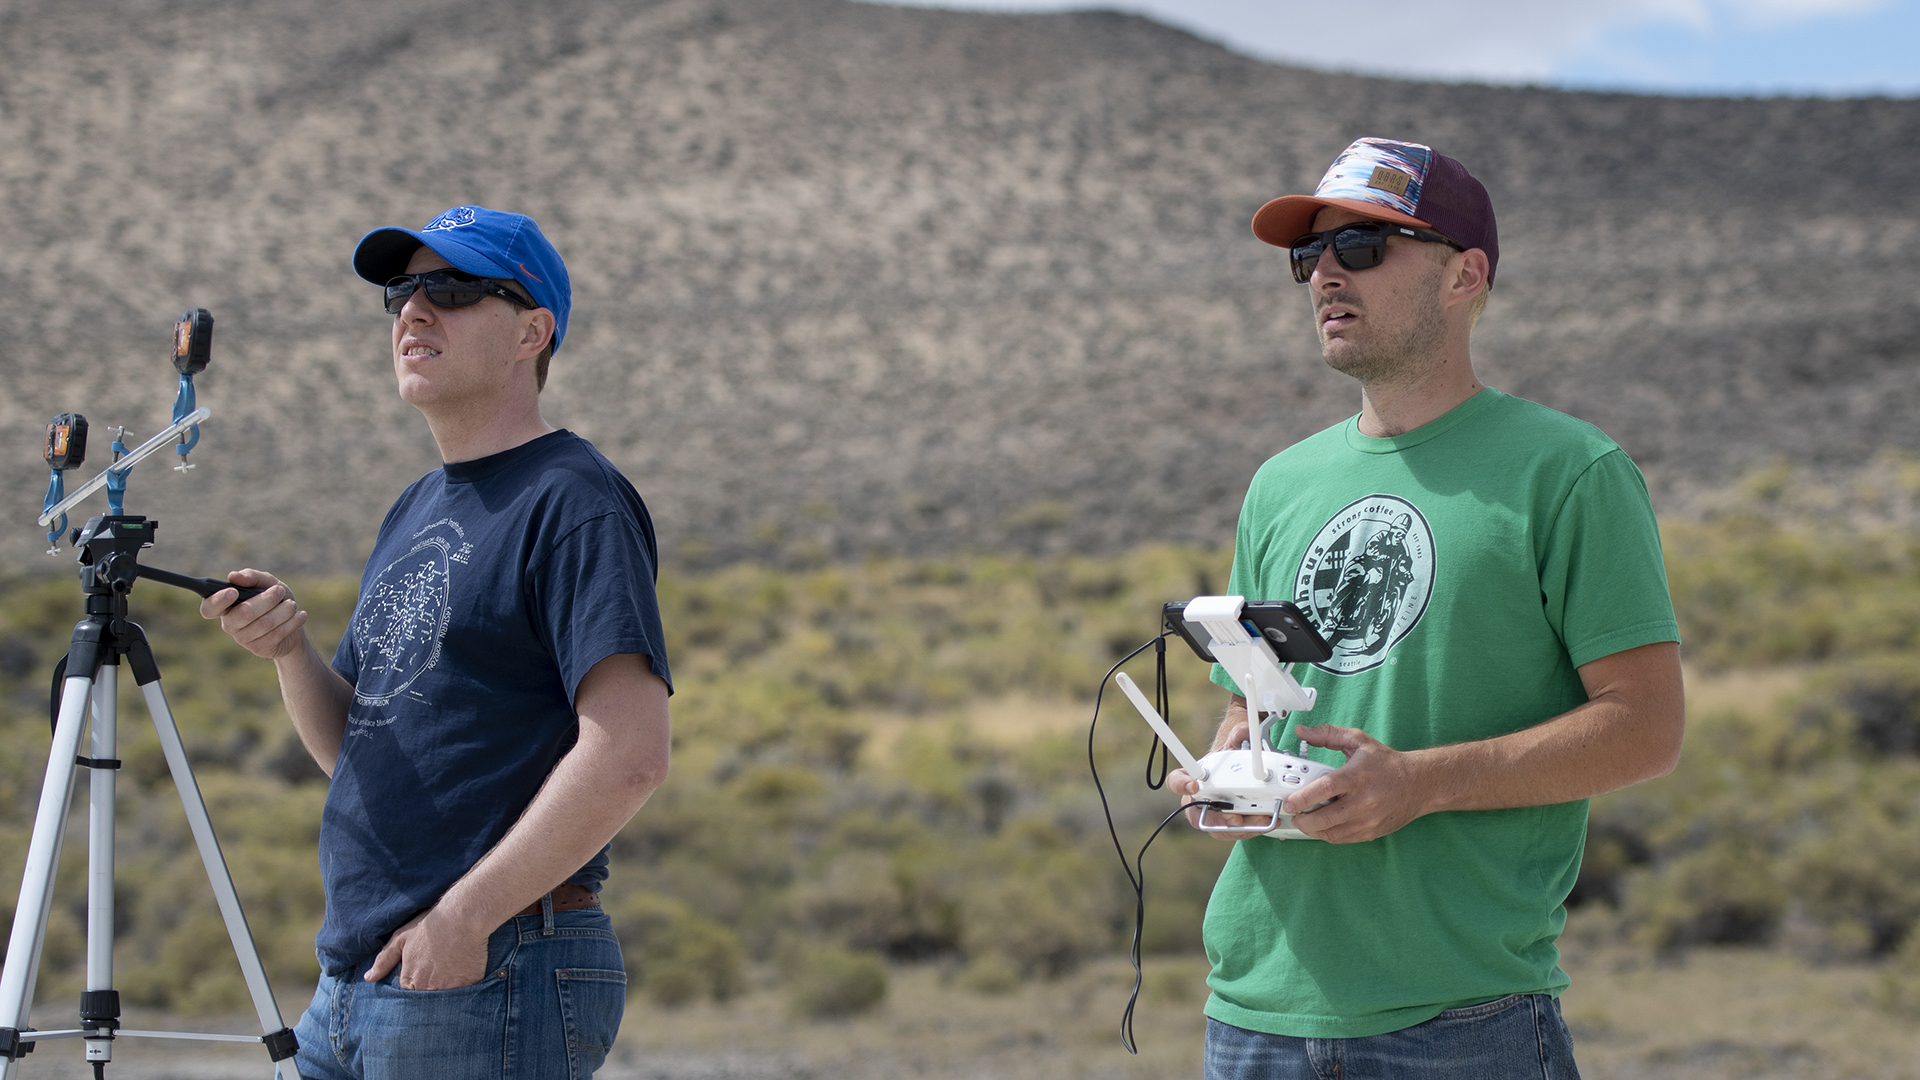 One researcher holding onto tripod, the other one piloting the drone with a controller